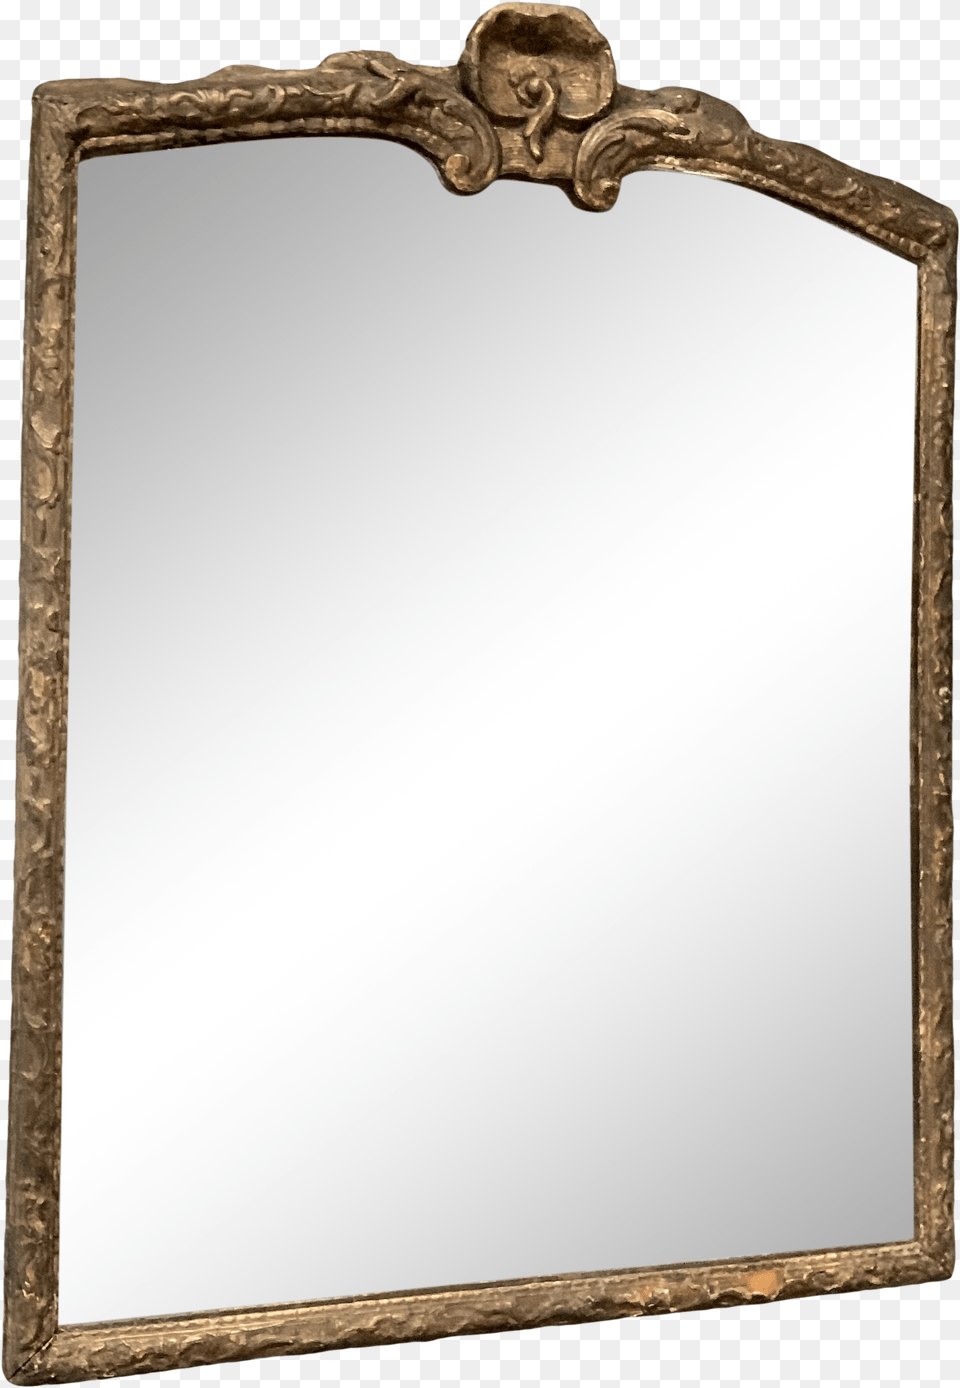 Antique Mirror With Ornate Wood Frame Picture Frame Png Image